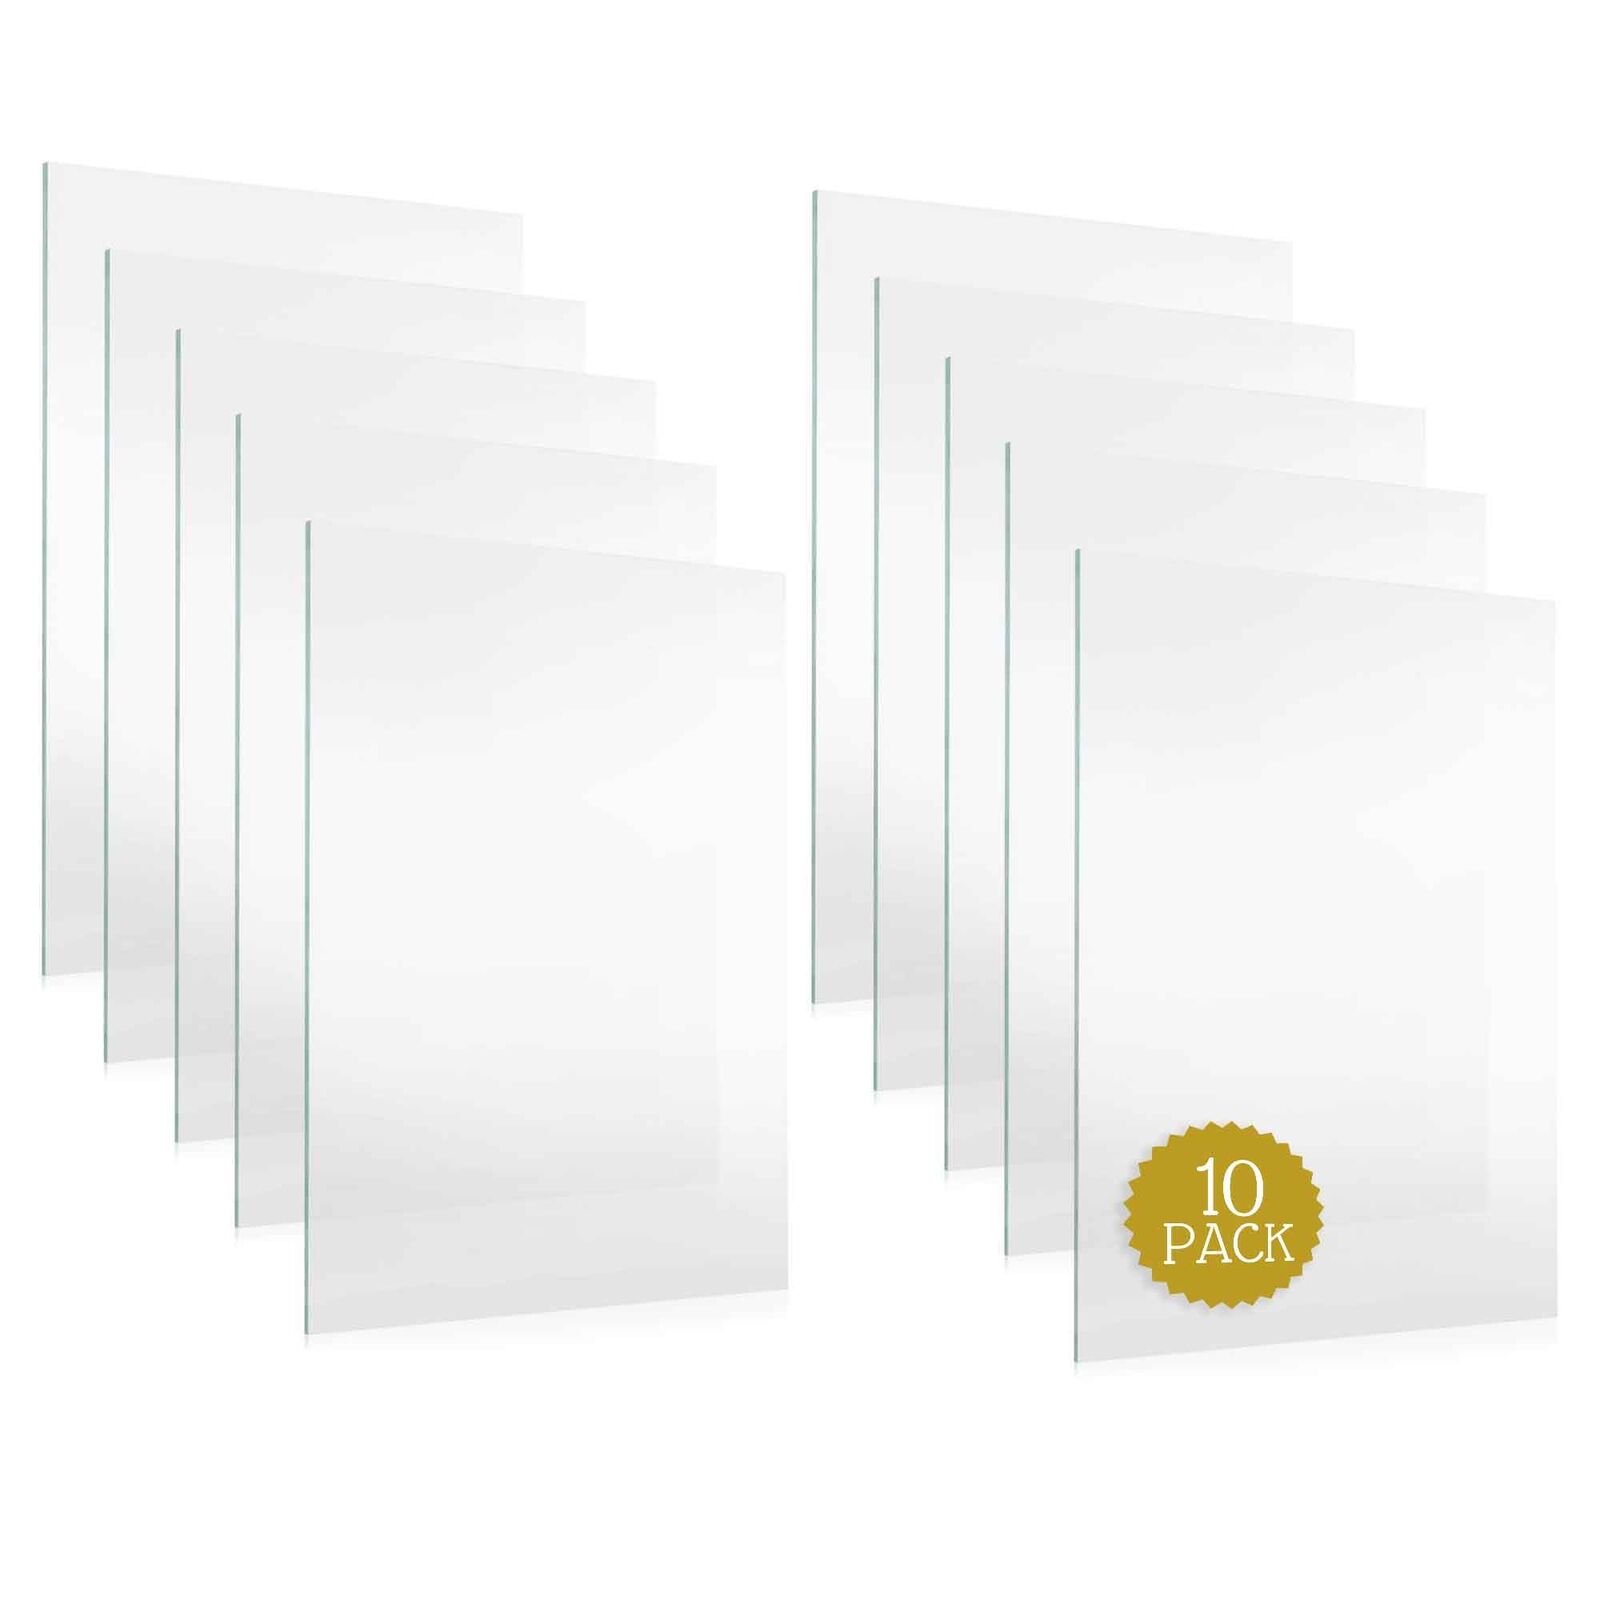 10 Sheets Of Non-Glare UV-Resistant Frame-Grade Acrylic Replacement for 20x24